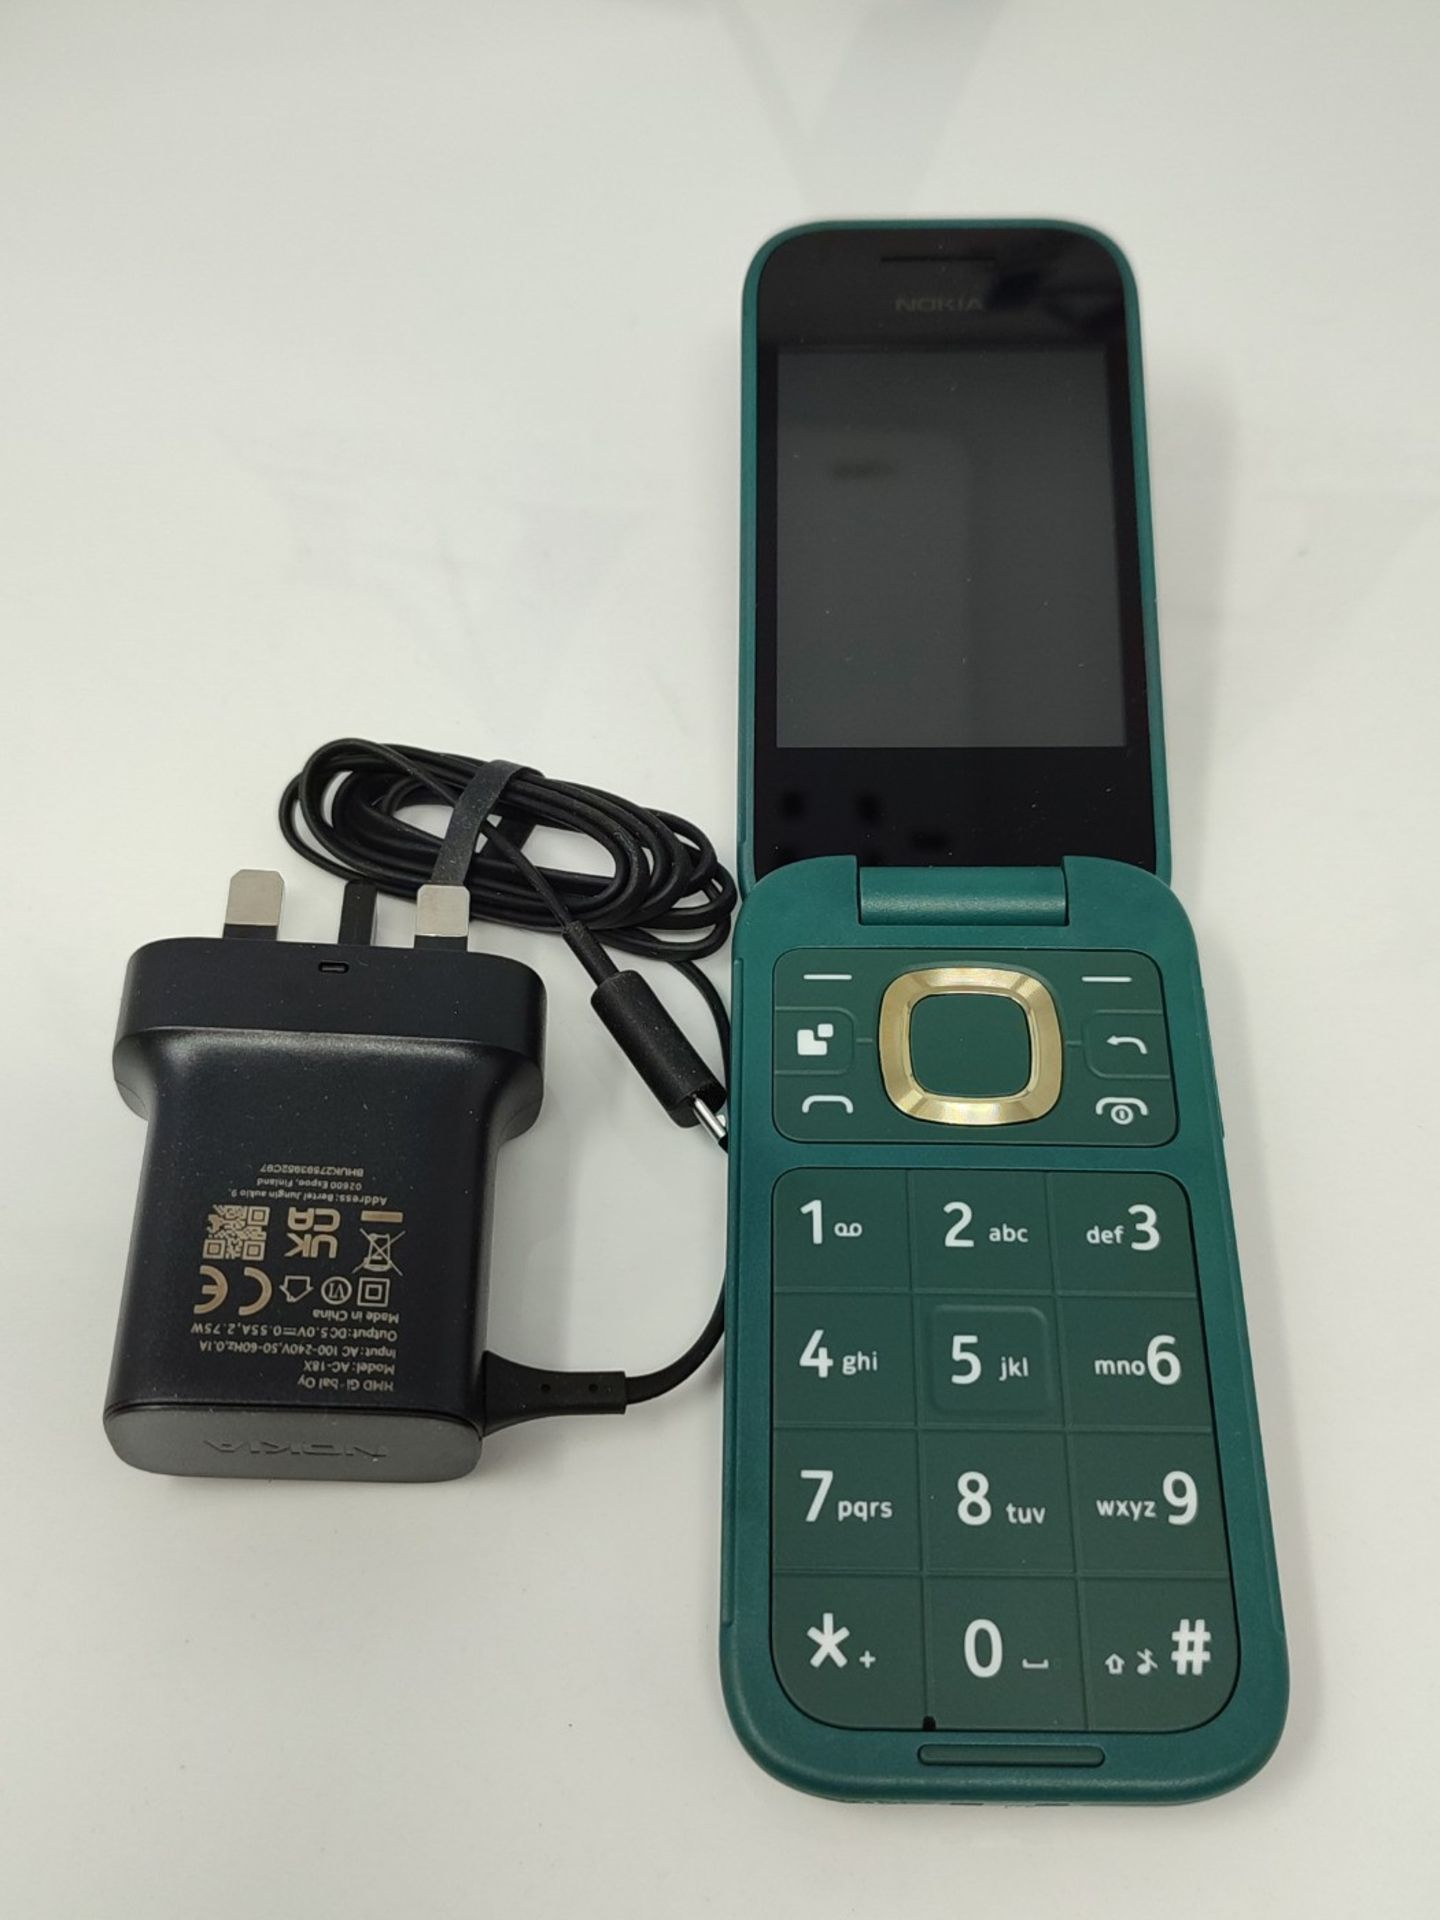 RRP £55.00 Nokia 2660 Flip Feature Phone with 2.8" display, 4G Connectivity, built-in camera, MP3 - Image 3 of 3